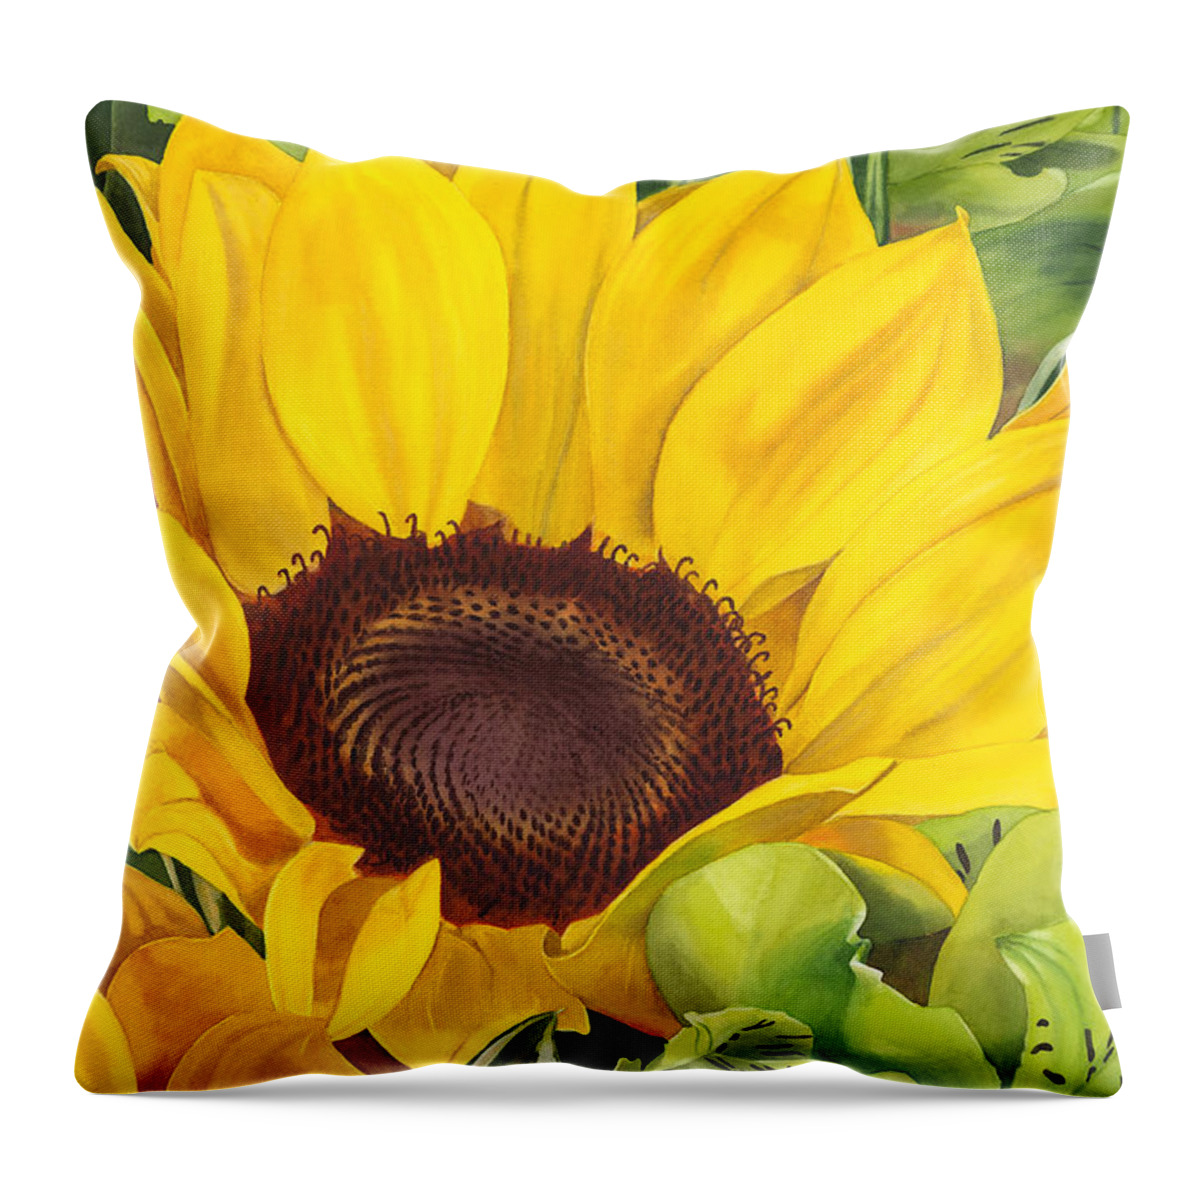 Flower Throw Pillow featuring the painting Let Me Brighten Your Day by Espero Art